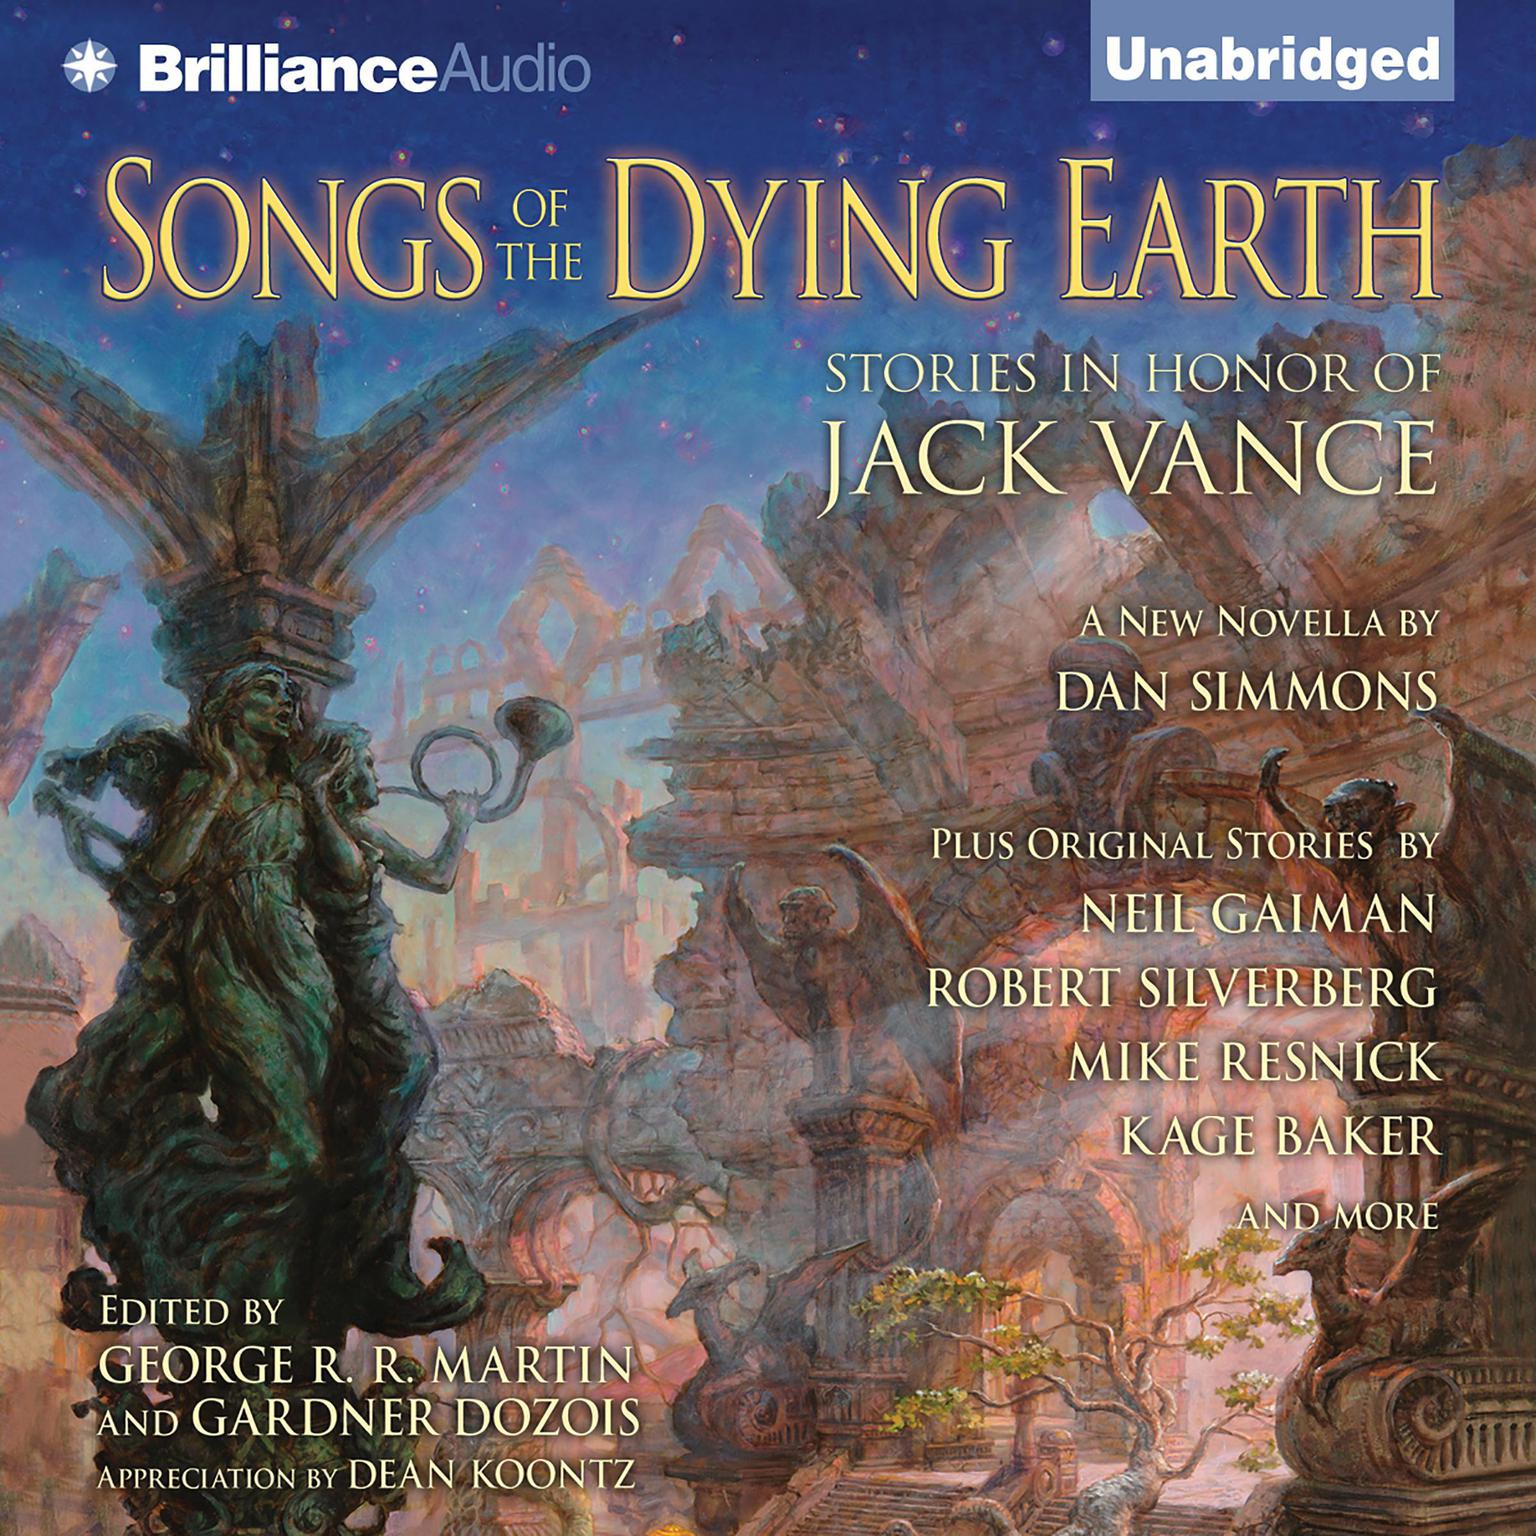 Songs of the Dying Earth: Stories in Honor of Jack Vance Audiobook, by George R. R. Martin